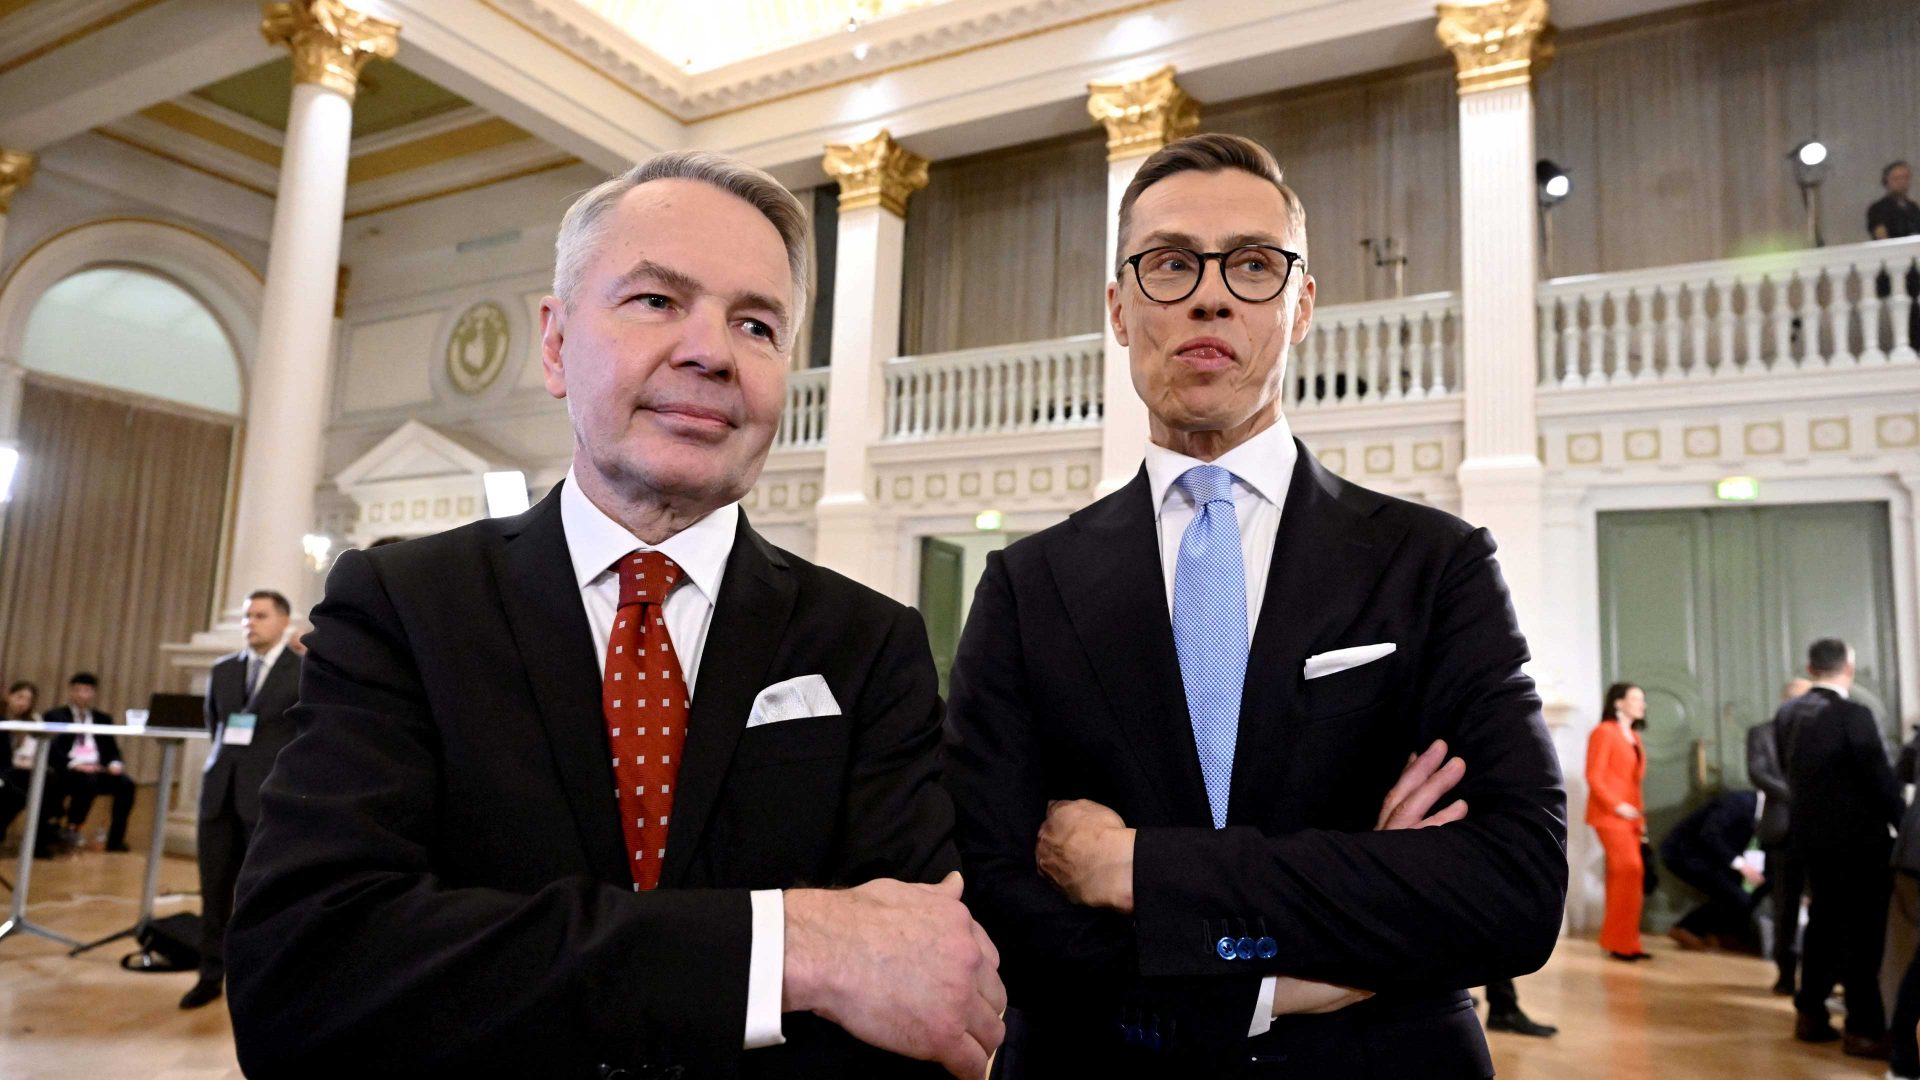 Finnish former foreign minister and candidate of the Green League Pekka Haavisto and Finnish former prime minister and candidate of the National Coalition Party NCP Alexander Stubb. Photo: MARKKU ULANDER/Lehtikuva/AFP via Getty Images